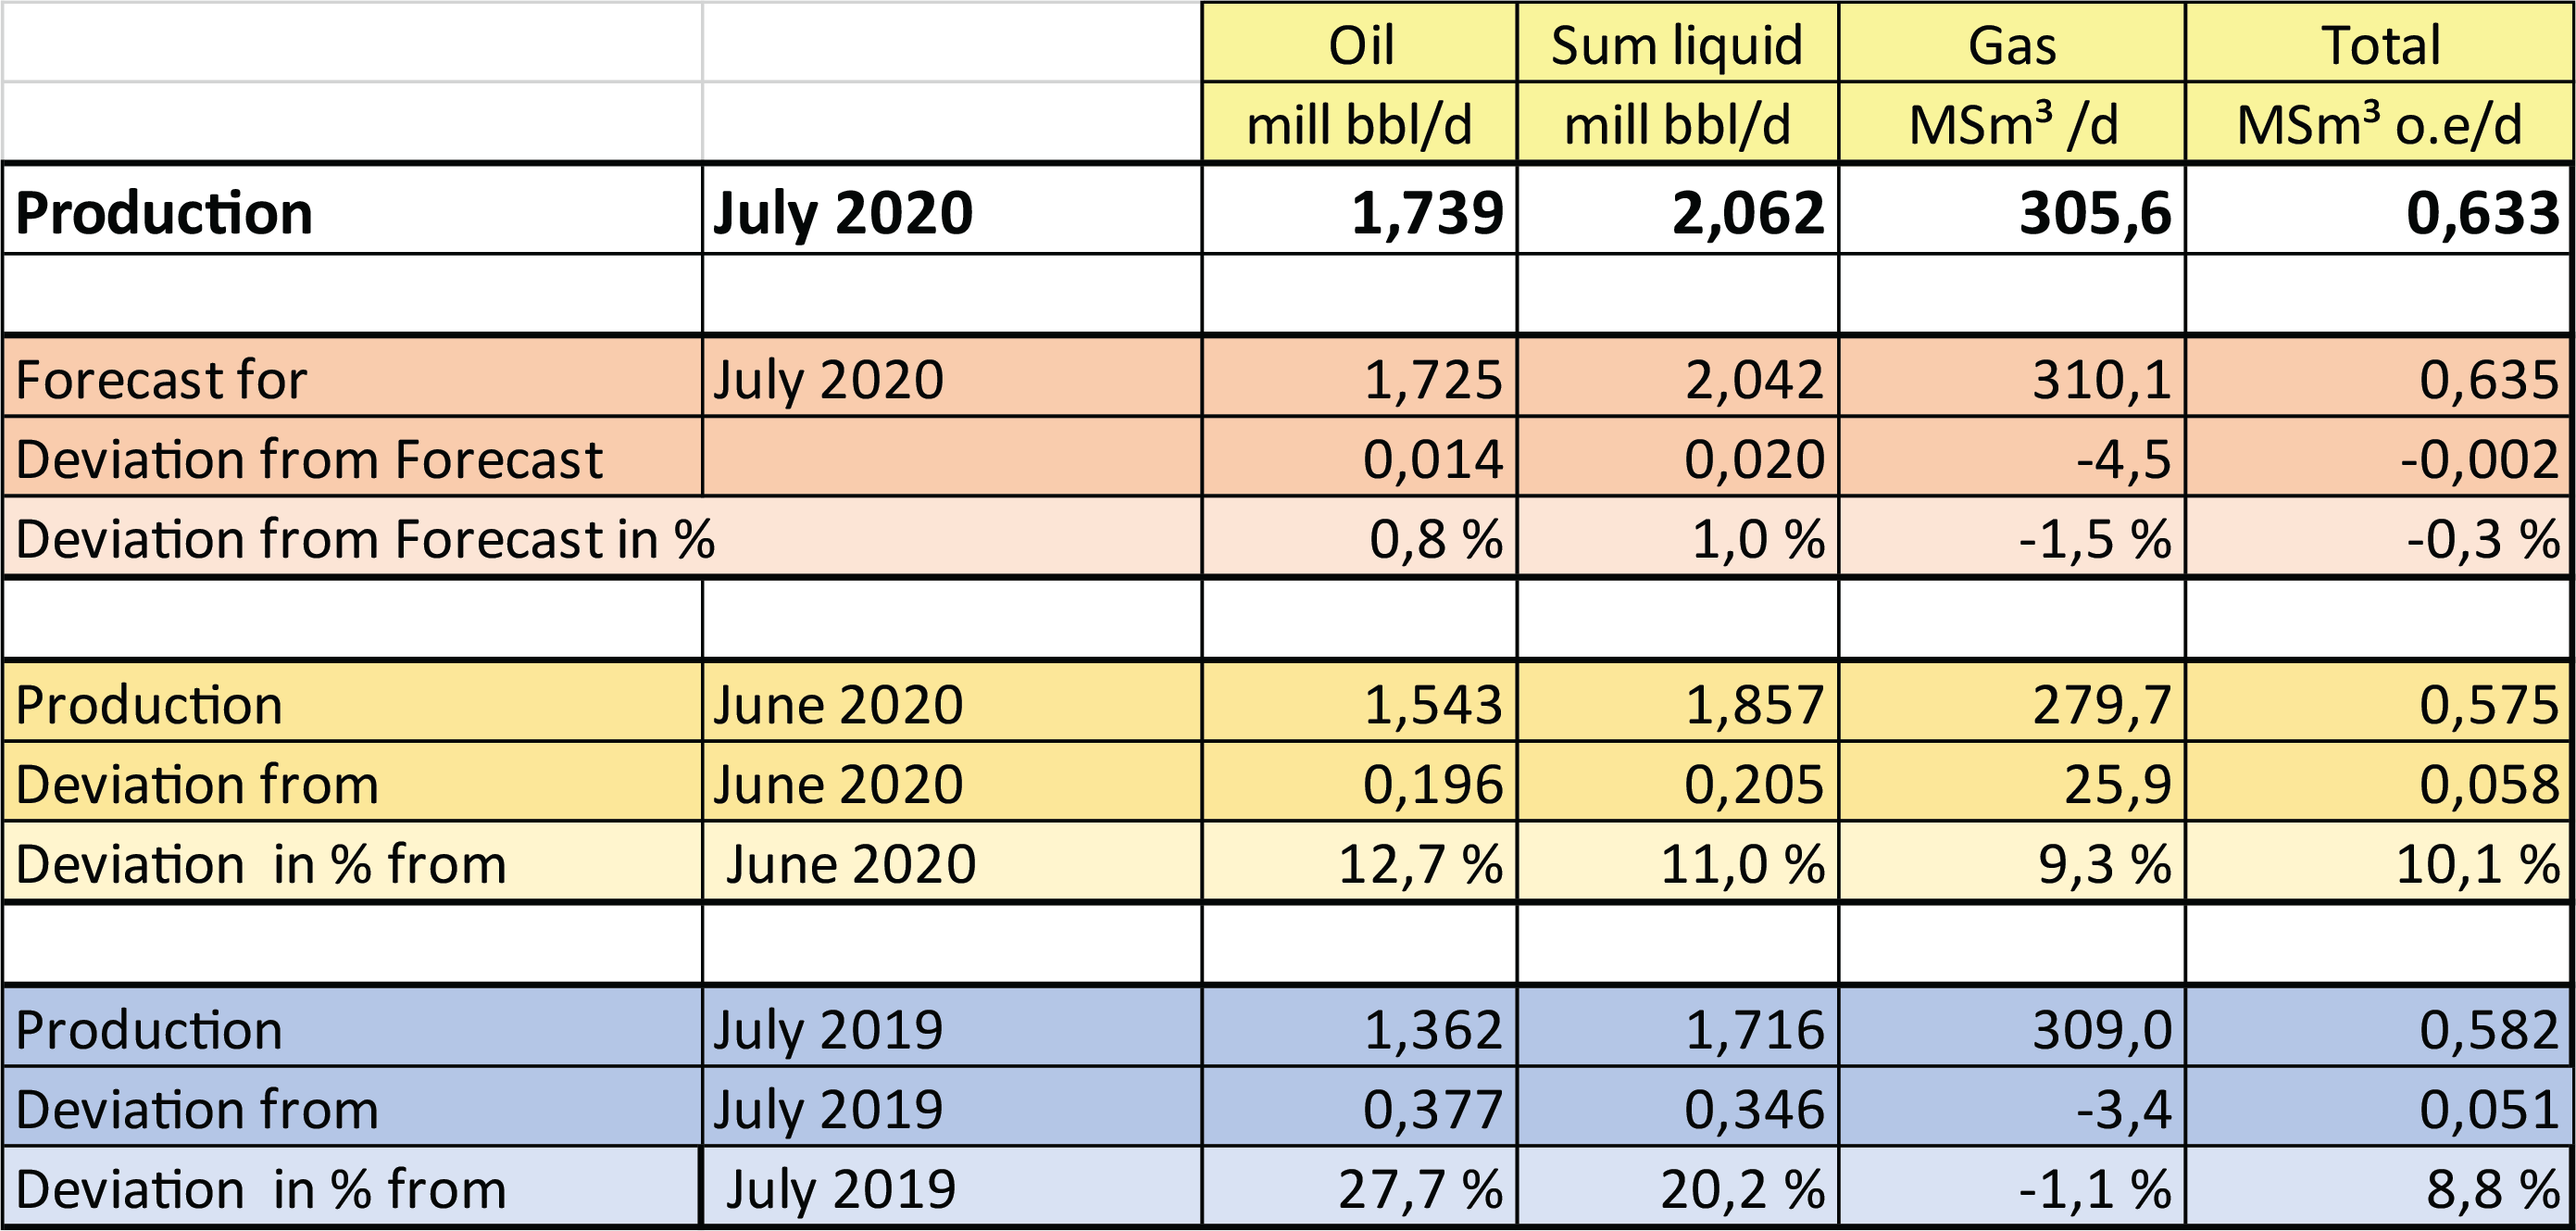 Figure of production July 2020